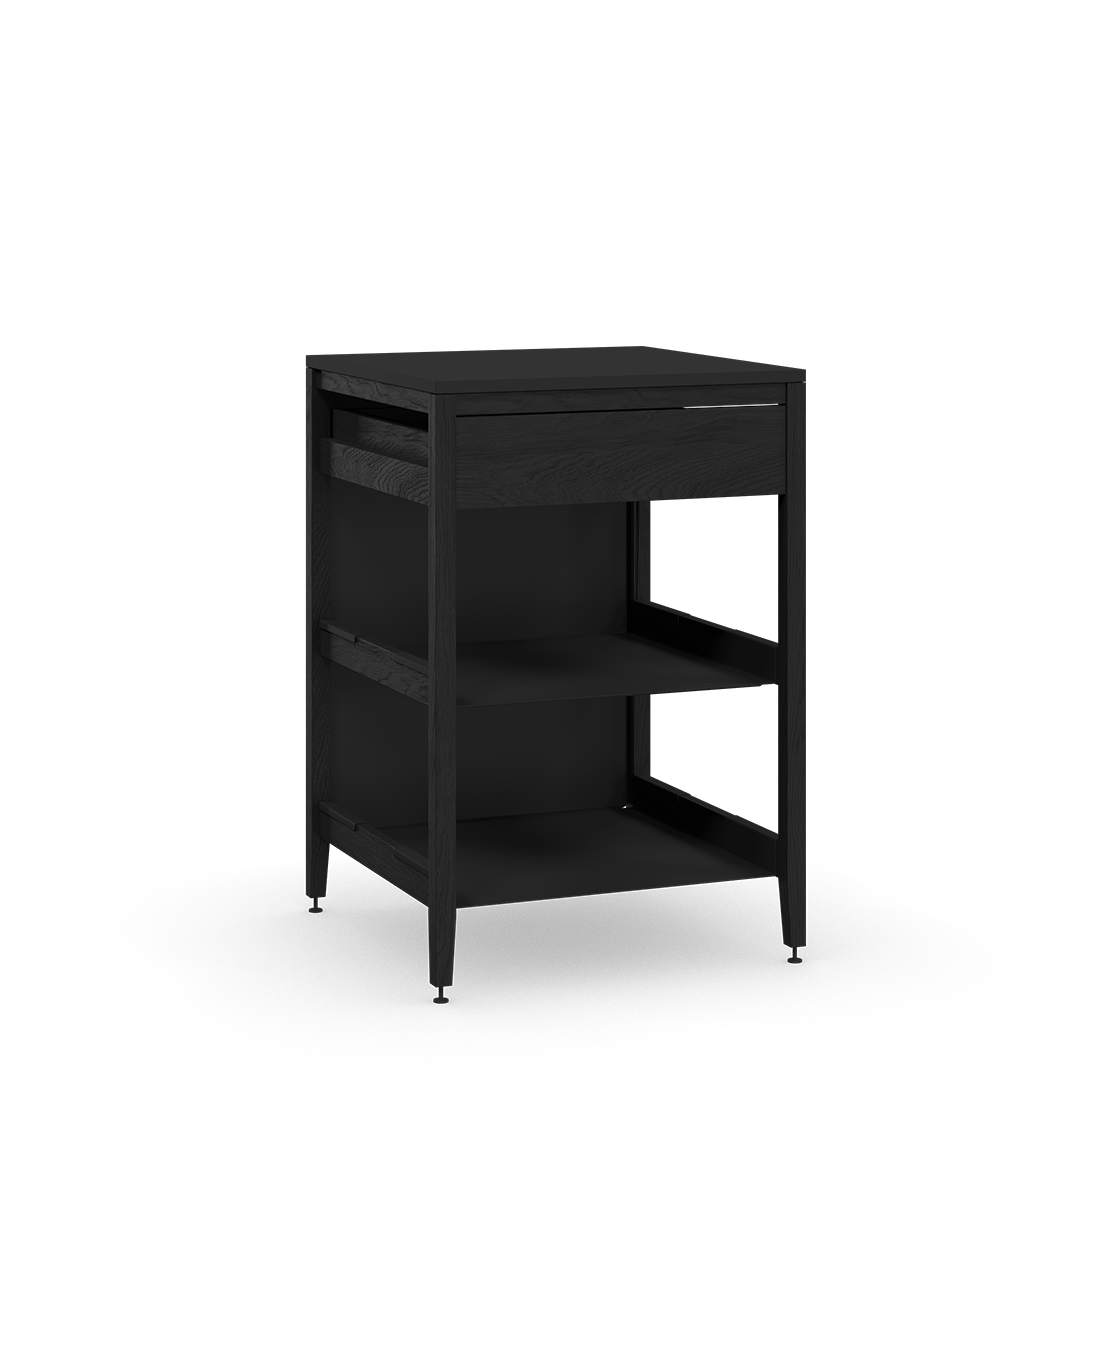 Coquo modular kitchen cabinet in black stained oak with one drawer and two metal shelves with a tall metal back. 